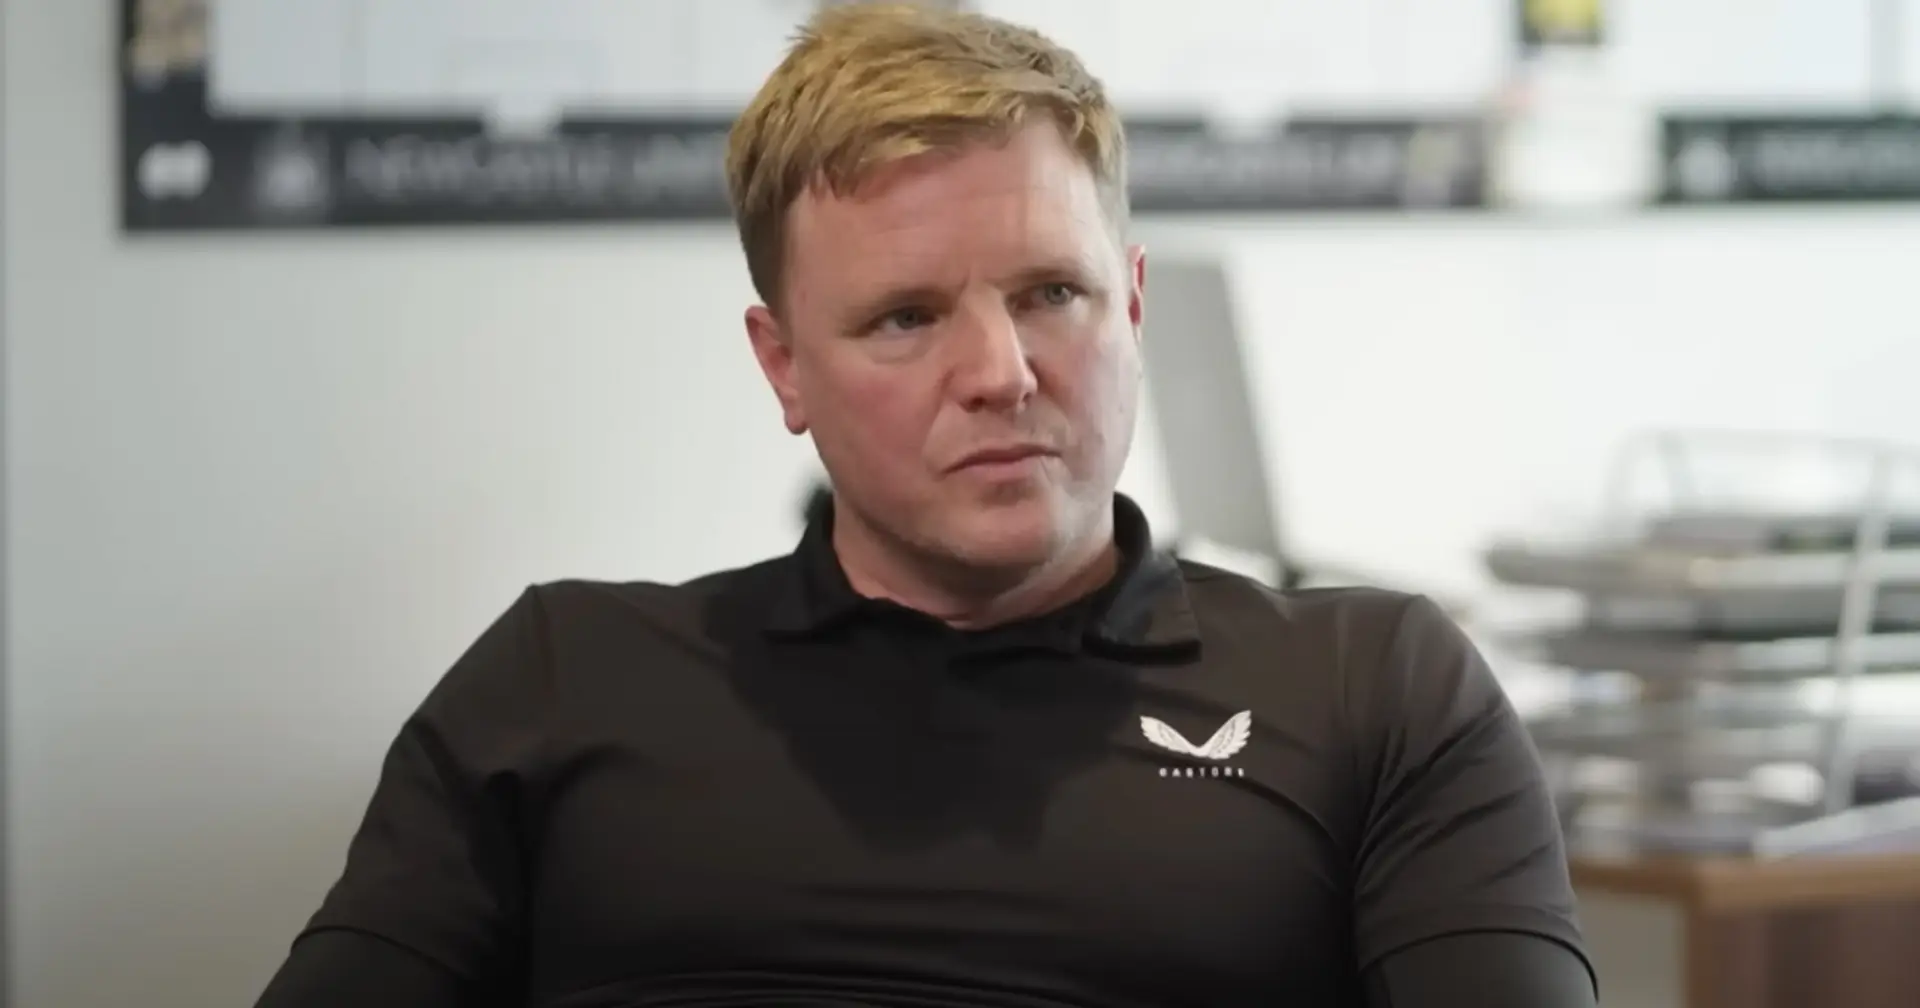 'That moment when you're going to disappoint them': Eddie Howe shares the toughest aspect of being a manager